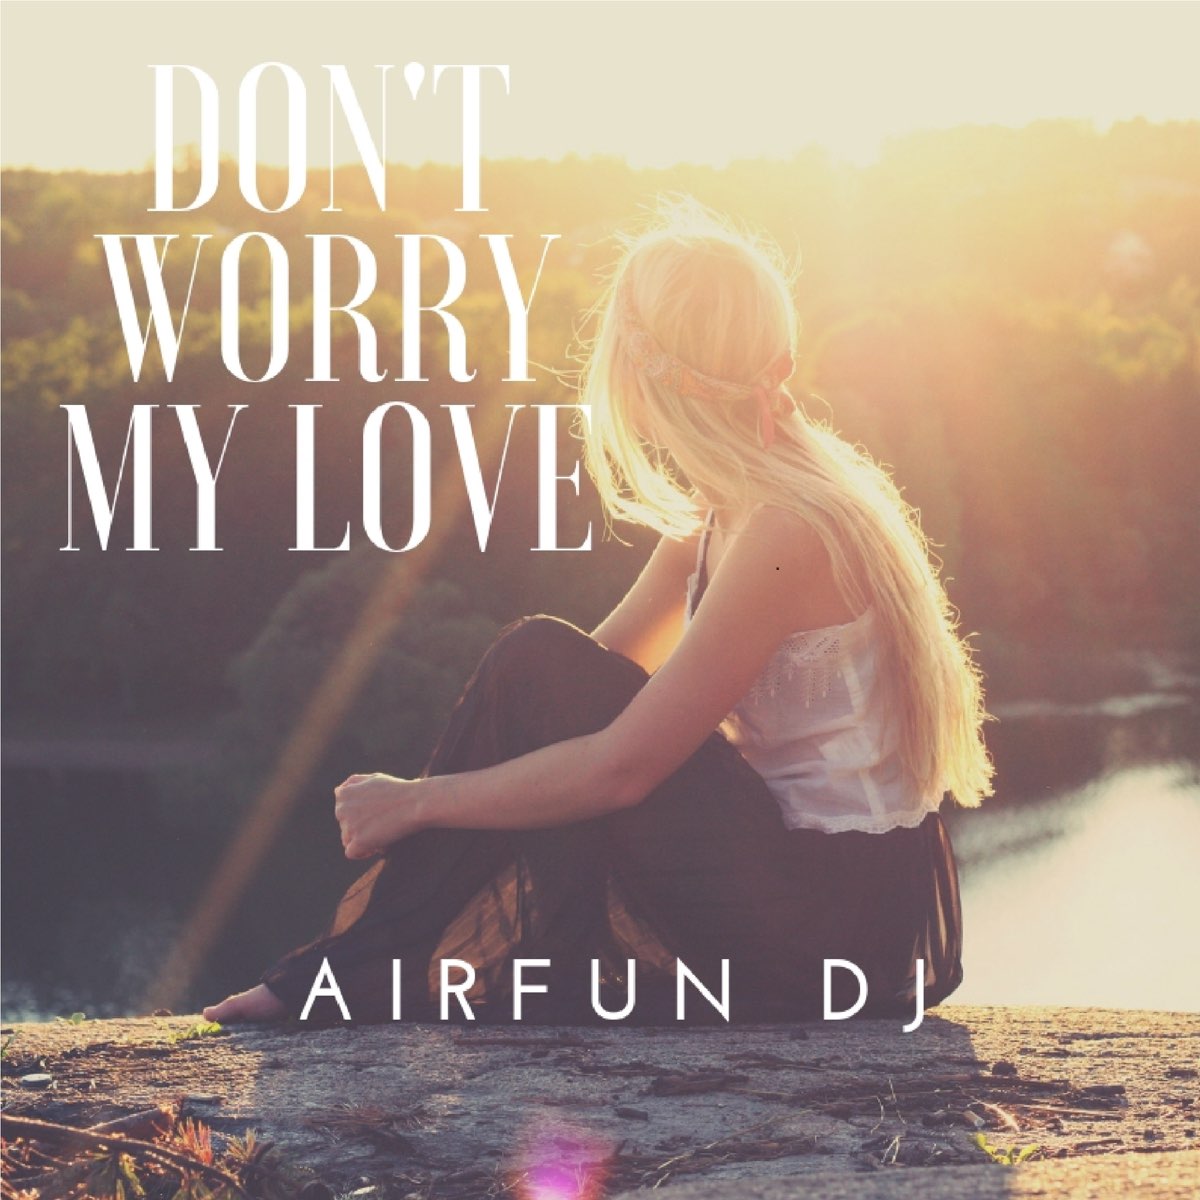 New don t you worry. Don't worry my Love. AIRFUN. Оля Грэм песня don't worry. Don't you worry don't you worry.